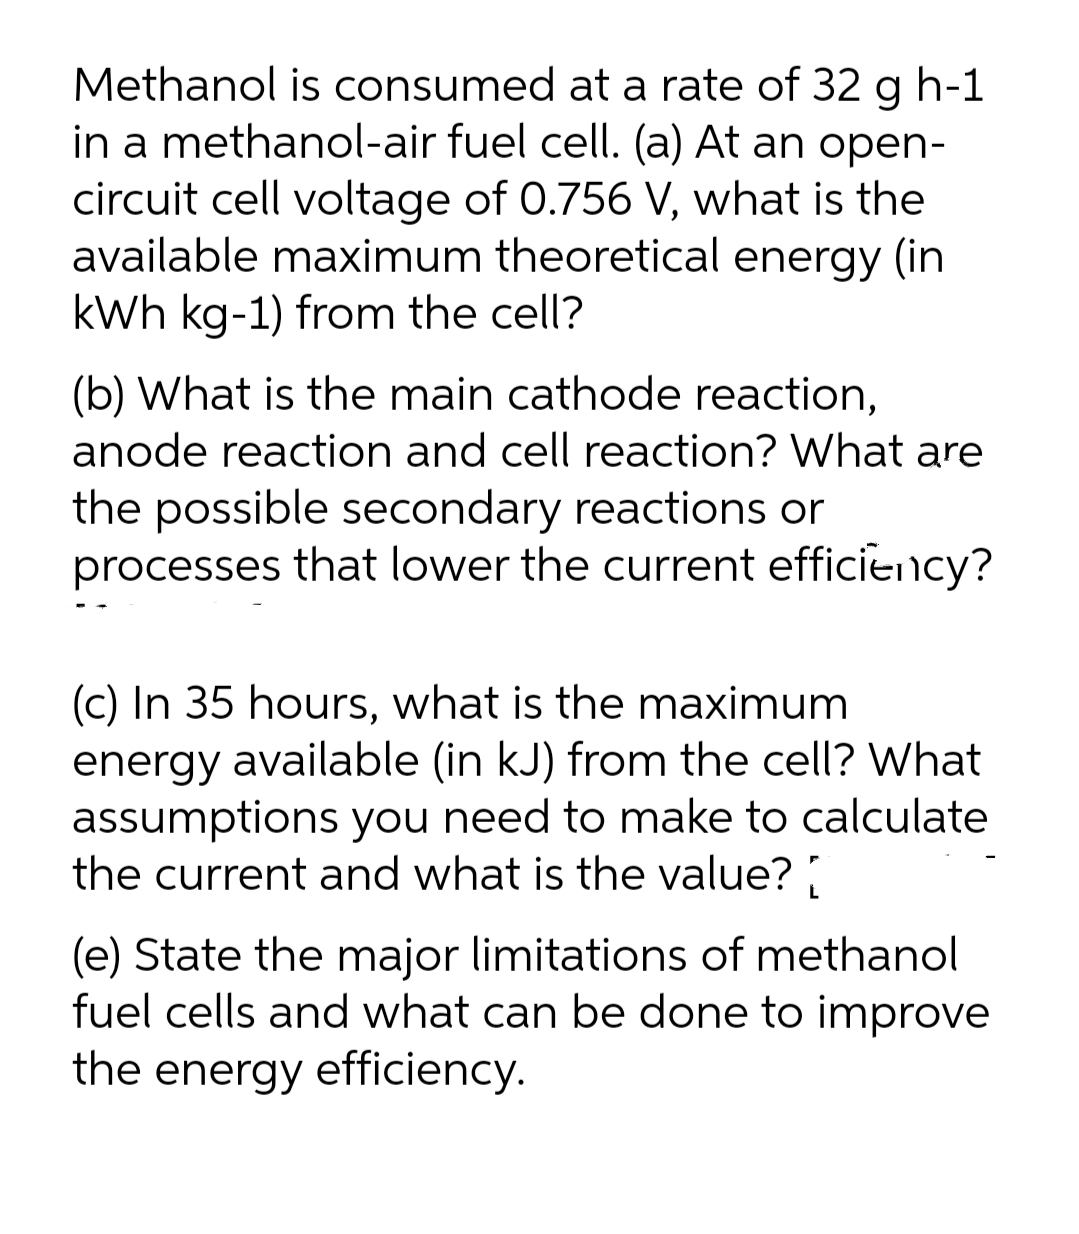 Methanol is consumed at a rate of 32 g h-1
in a methanol-air fuel cell. (a) At an open-
circuit cell voltage of 0.756 V, what is the
available maximum theoretical energy (in
kWh kg-1) from the cell?
(b) What is the main cathode reaction,
anode reaction and cell reaction? What are
the possible secondary reactions or
processes that lower the current efficiency?
(c) In 35 hours, what is the maximum
energy available (in kJ) from the cell? What
assumptions you need to make to calculate
the current and what is the value?
(e) State the major limitations of methanol
fuel cells and what can be done to improve
the energy efficiency.
